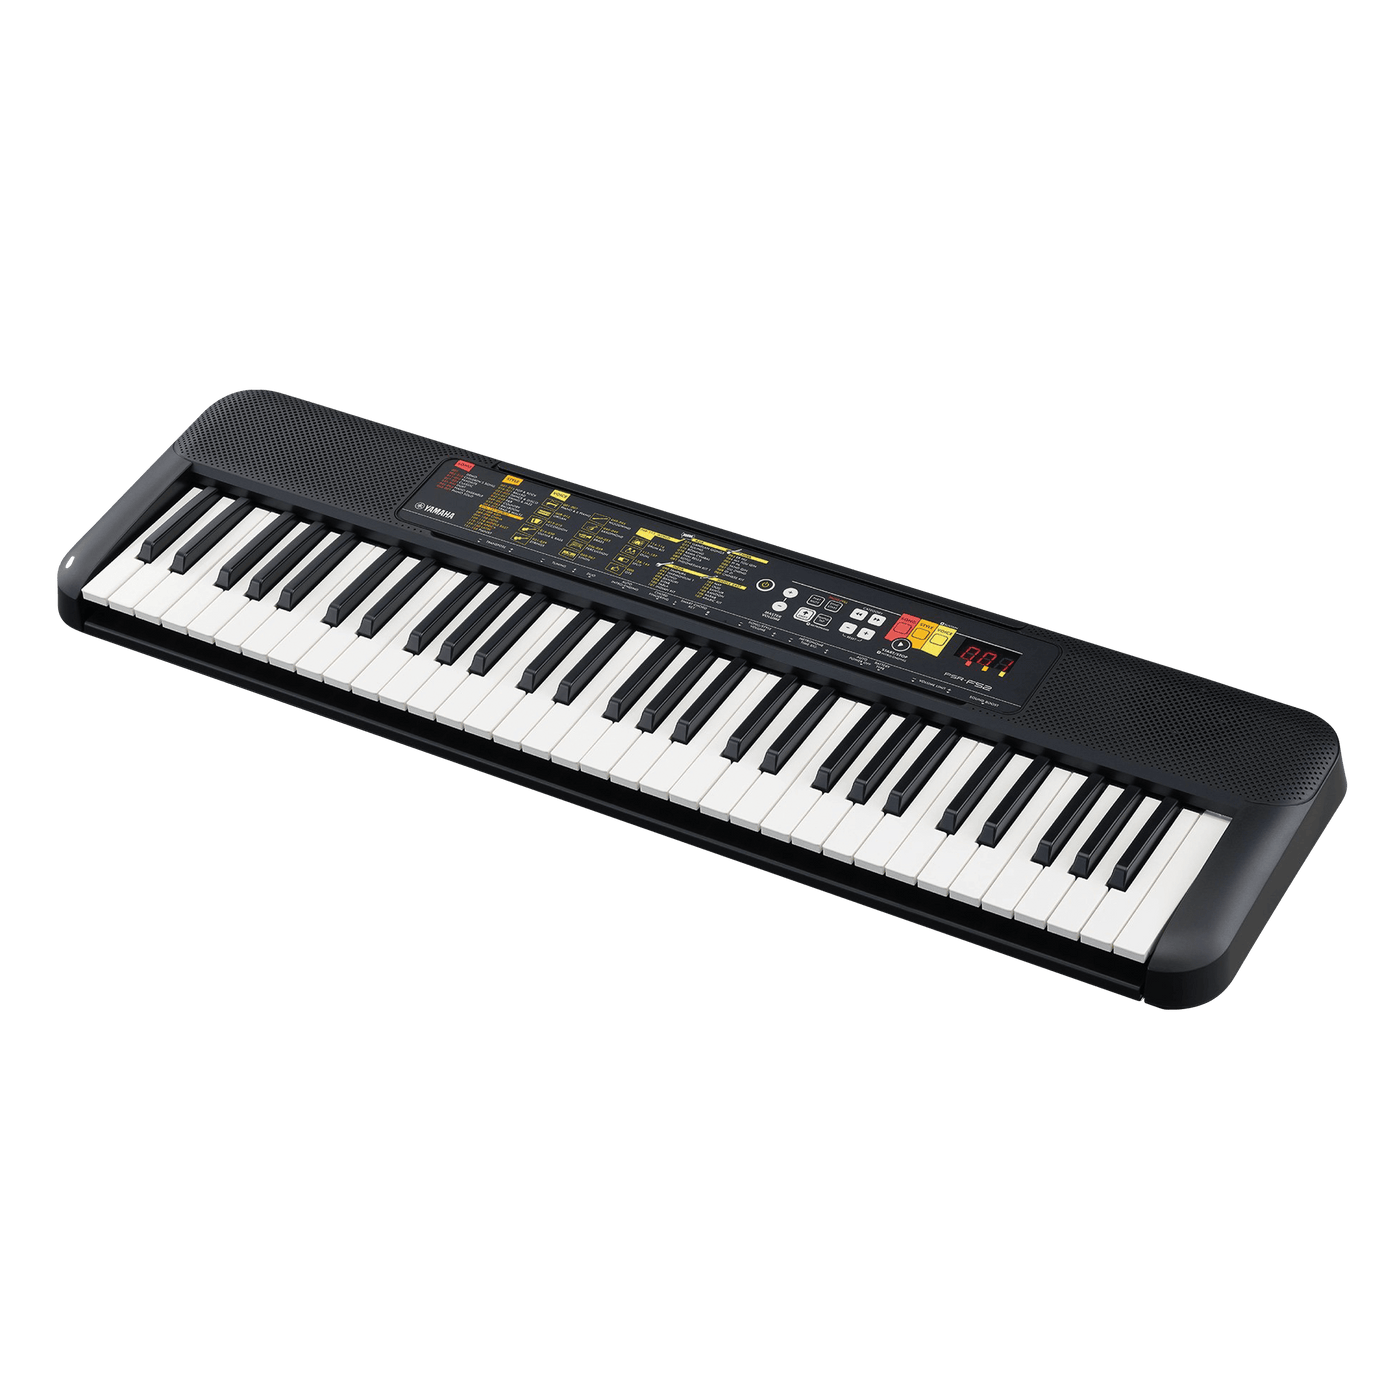 Yamaha PSR-F52 - $139990 - Gearhub - The PSR-F52 is the perfect keyboard for people who want to learn to play. It has all the features you need for your first playing experience. What better way to try your hand at making music than on a keyboard made by world-renowned instrument manufacturer Yamaha? The PSR-F52 offers a solid foundation for anyone looking to start playing the keyboard.Información detallada del producto aquí Teclas • Cantidad: 61 • Tipo: Organ-style • Sensibilidad: No Características Genera